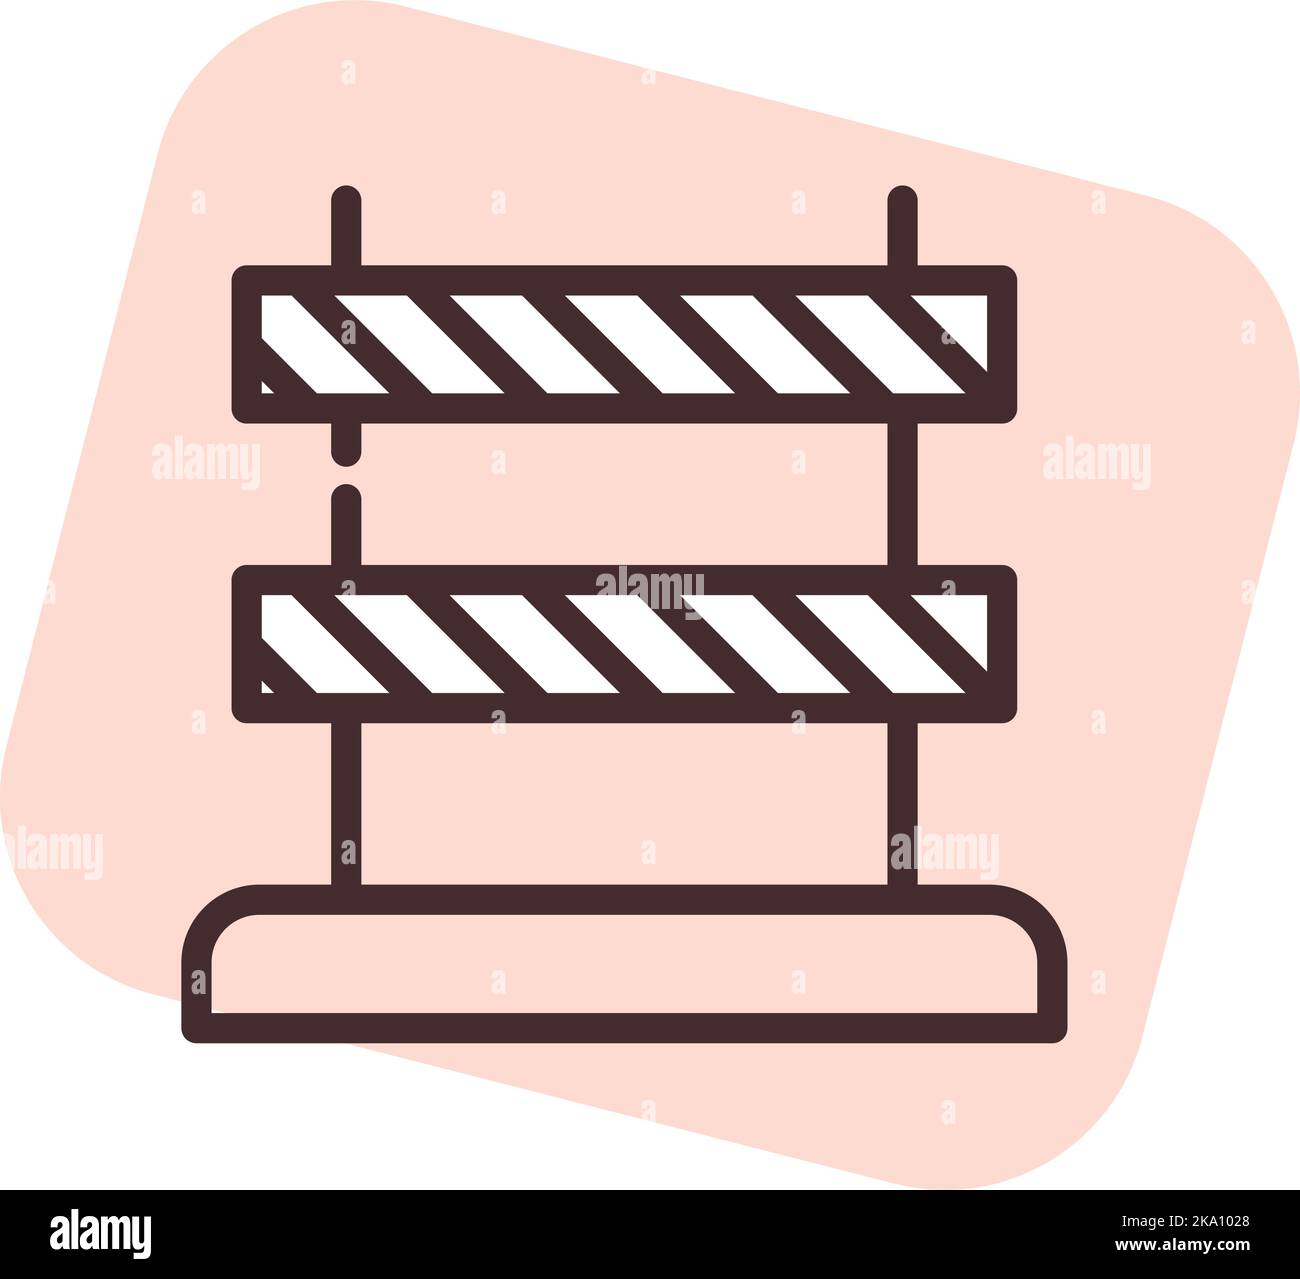 Construction equipment barrier, illustration or icon, vector on white background. Stock Vector